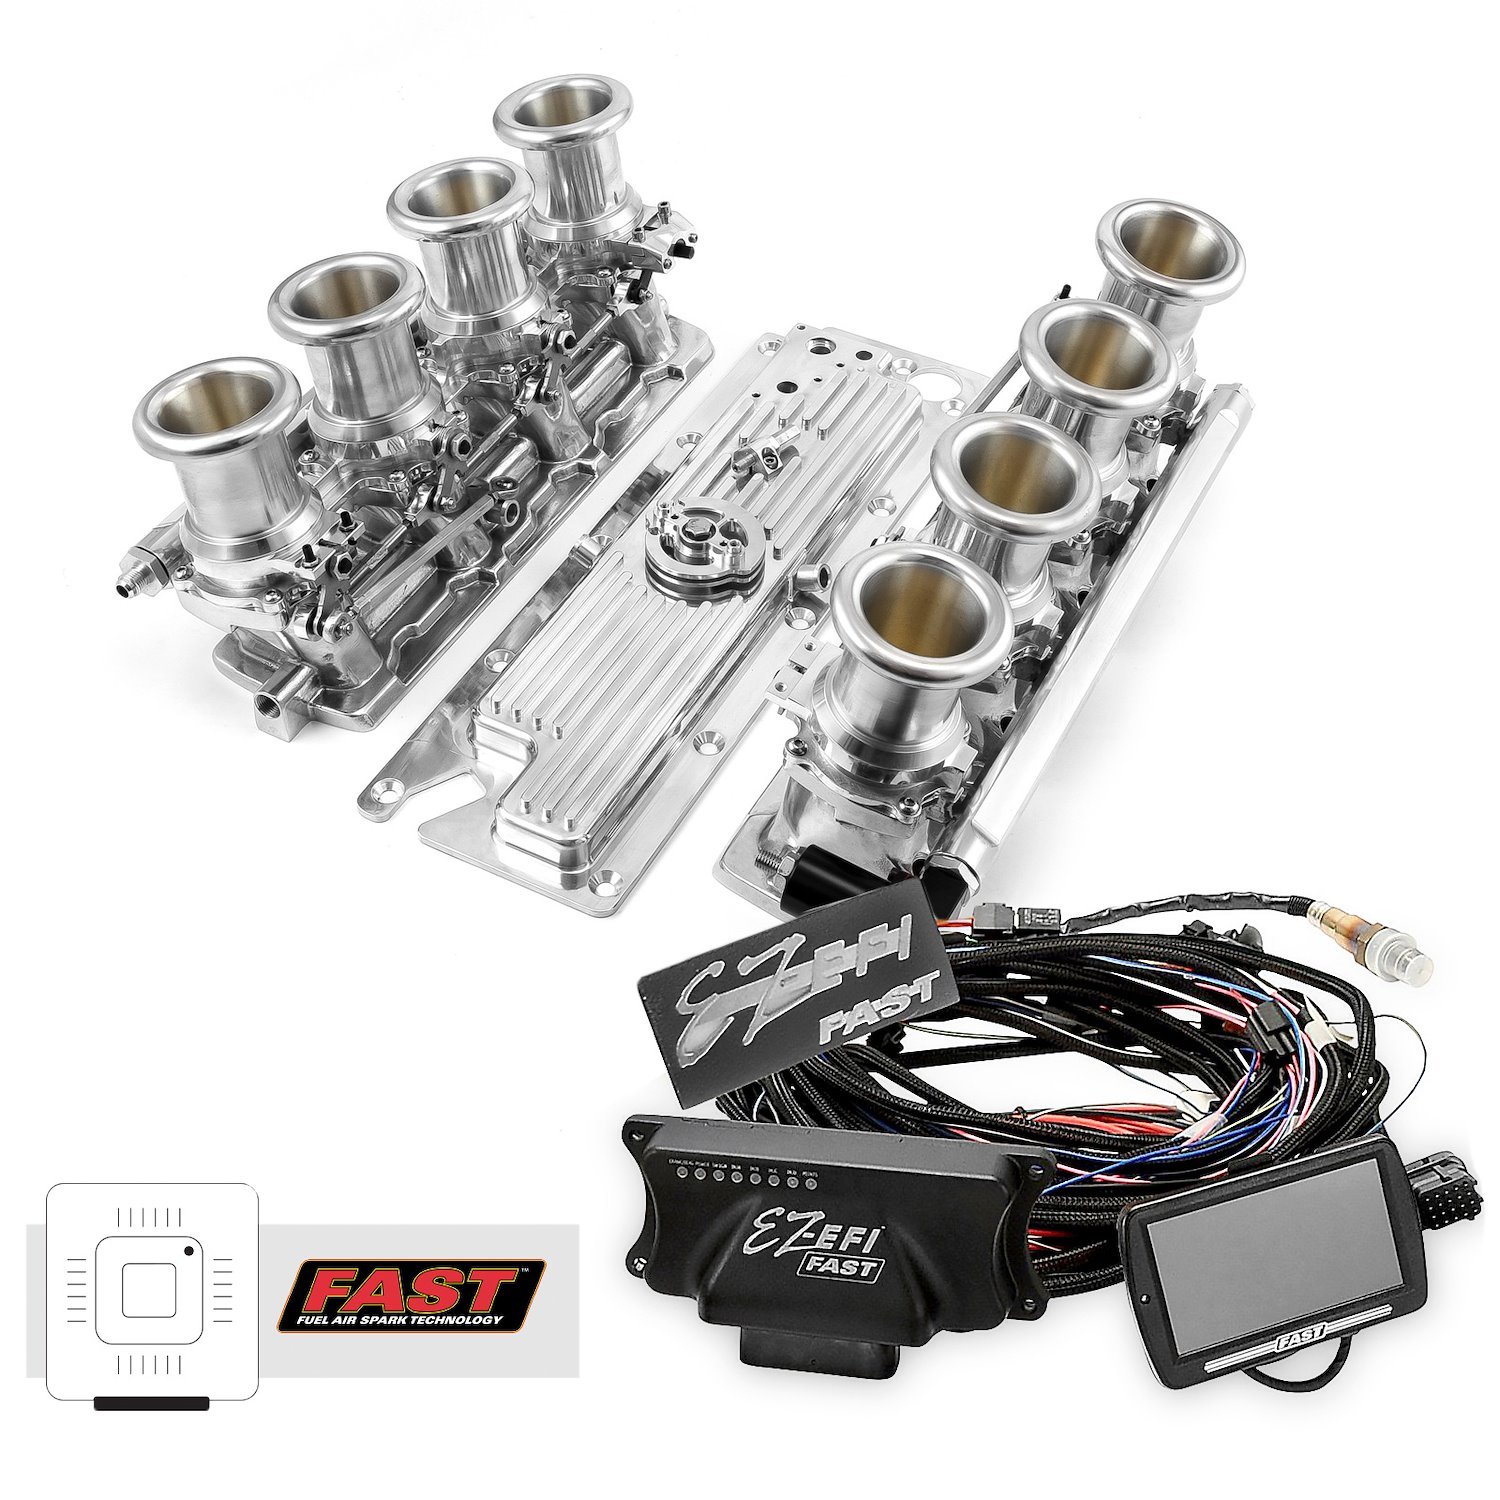 1-135-016 Chevy GM LS1 Downdraft + FAST EZ-EFI 2.0 Fuel Injection System - Polished